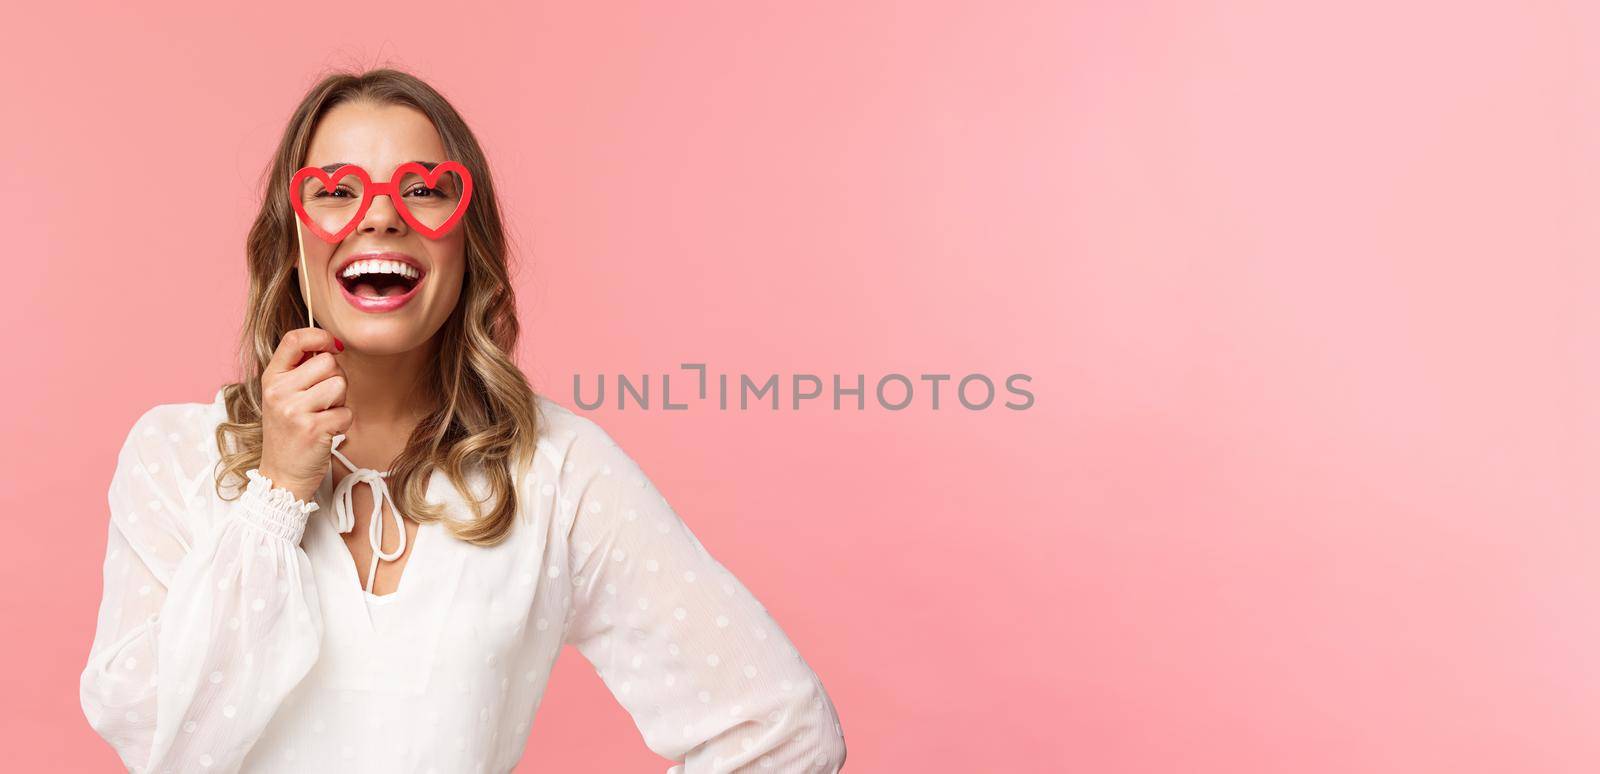 Spring, happiness and celebration concept. Close-up portrait of funny and carefree, beautiful caucasian woman with blond hair, white dress, holding heart-shaped glasses mask and laughing.